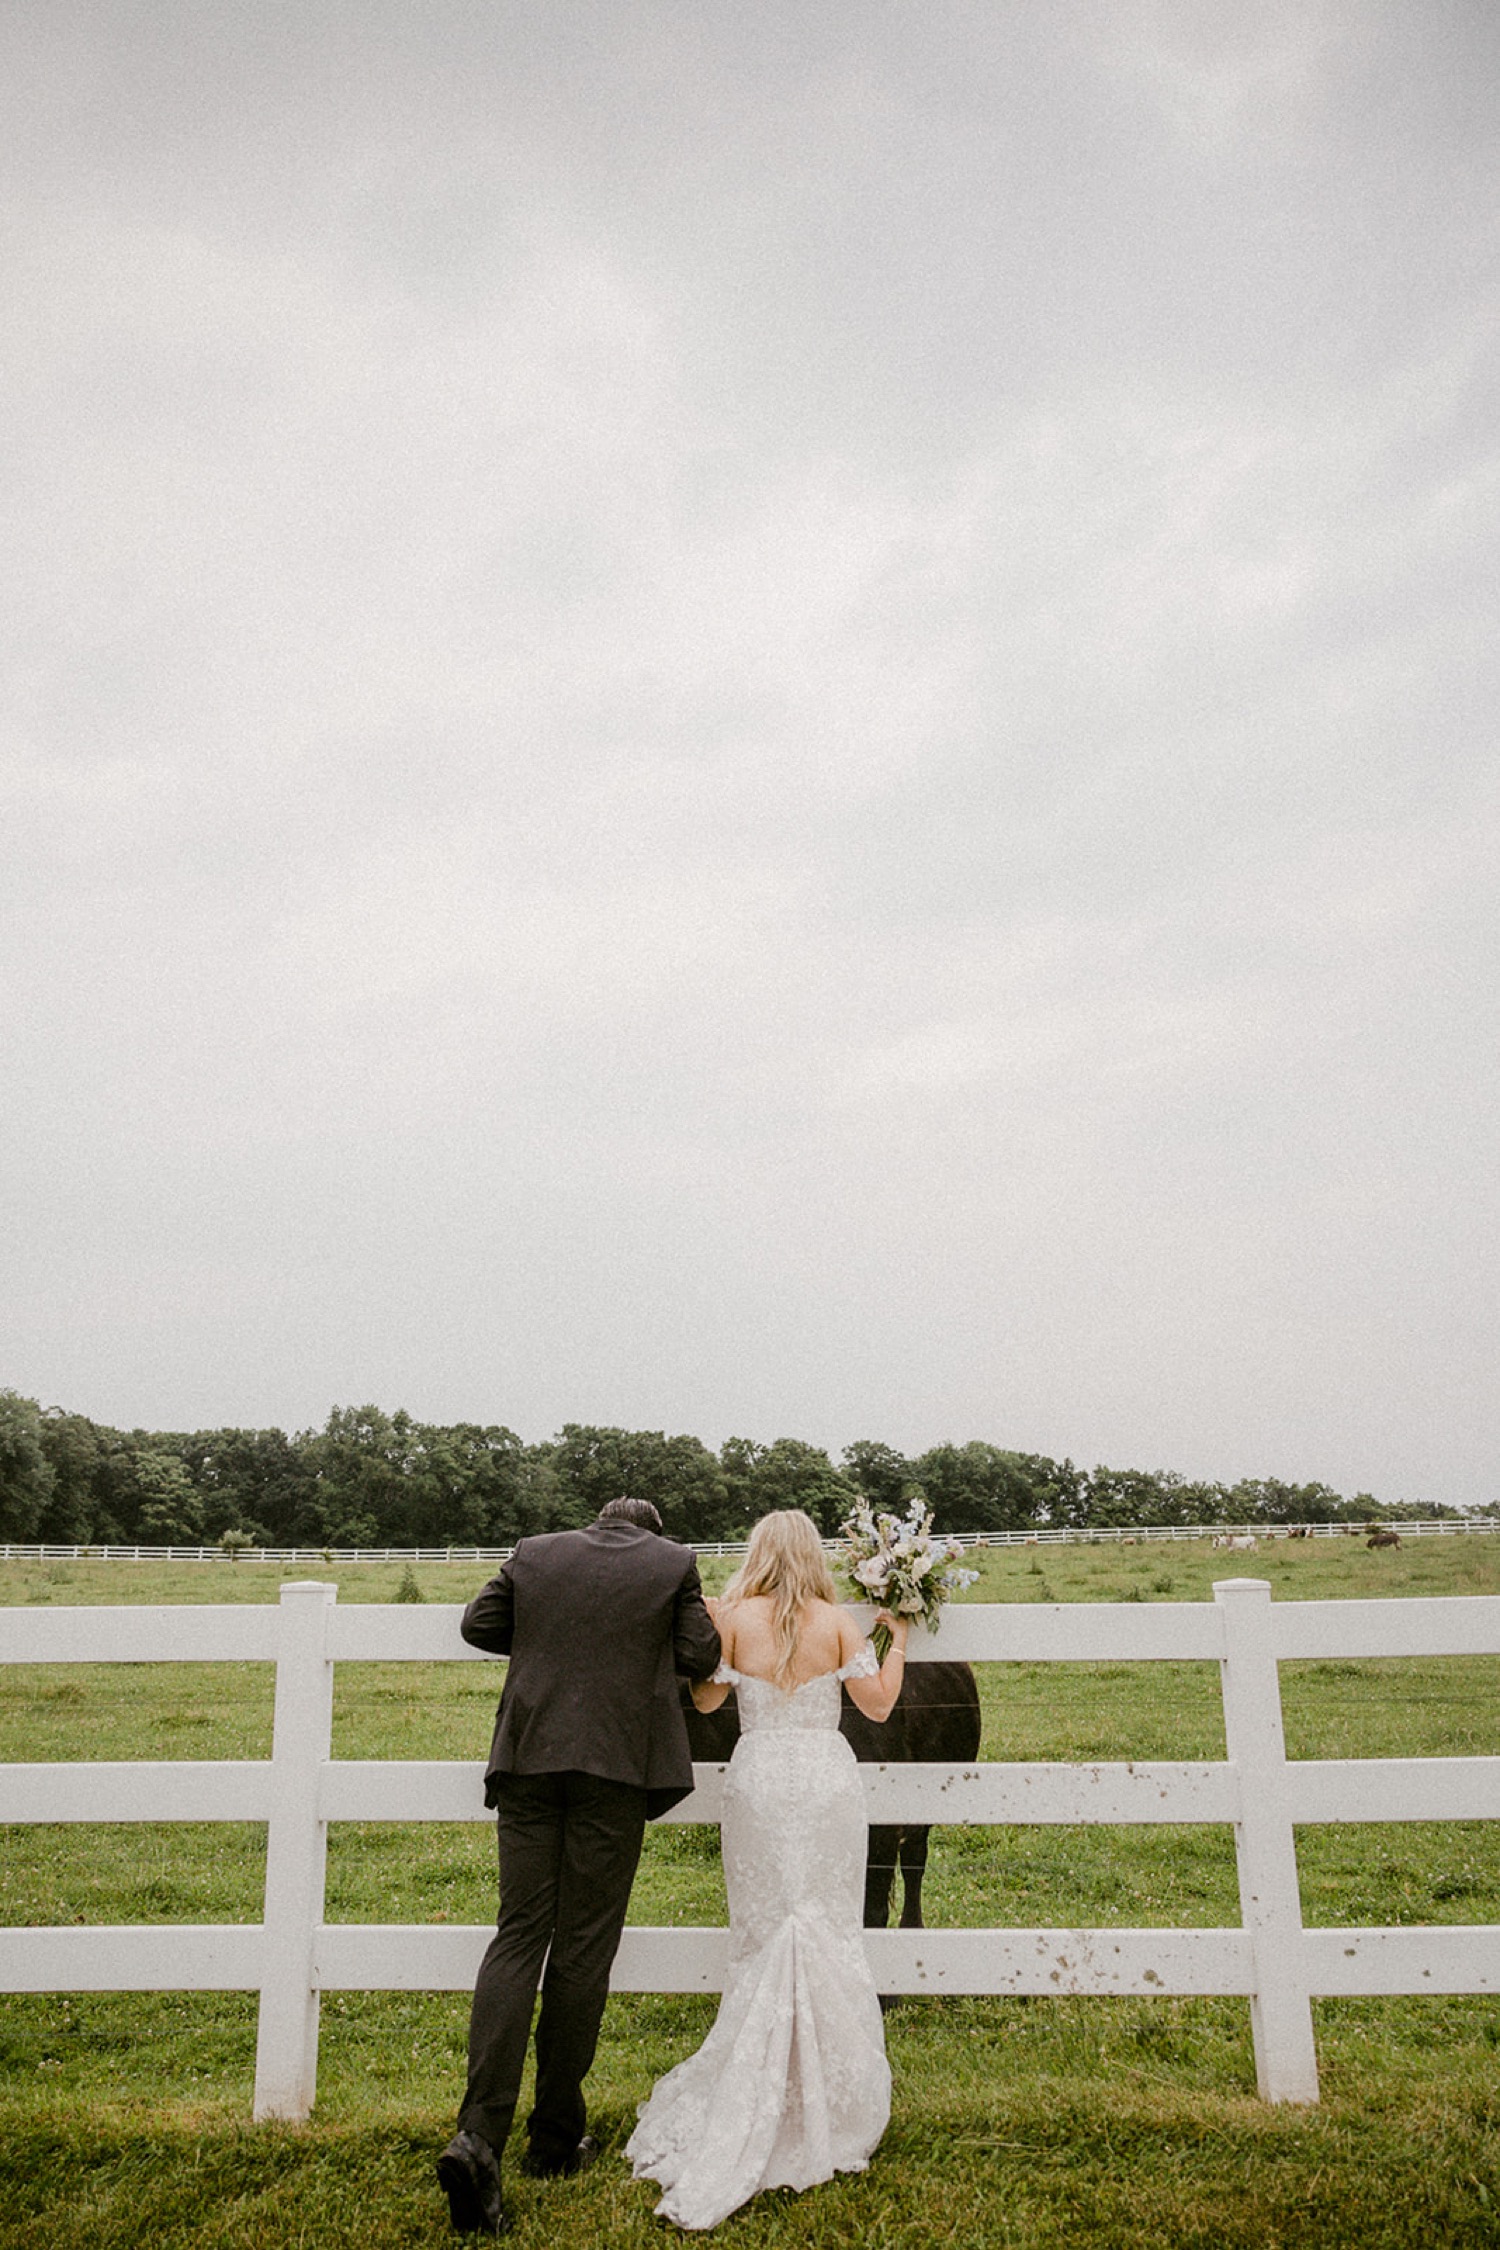 couple looking over white fence at farm animals